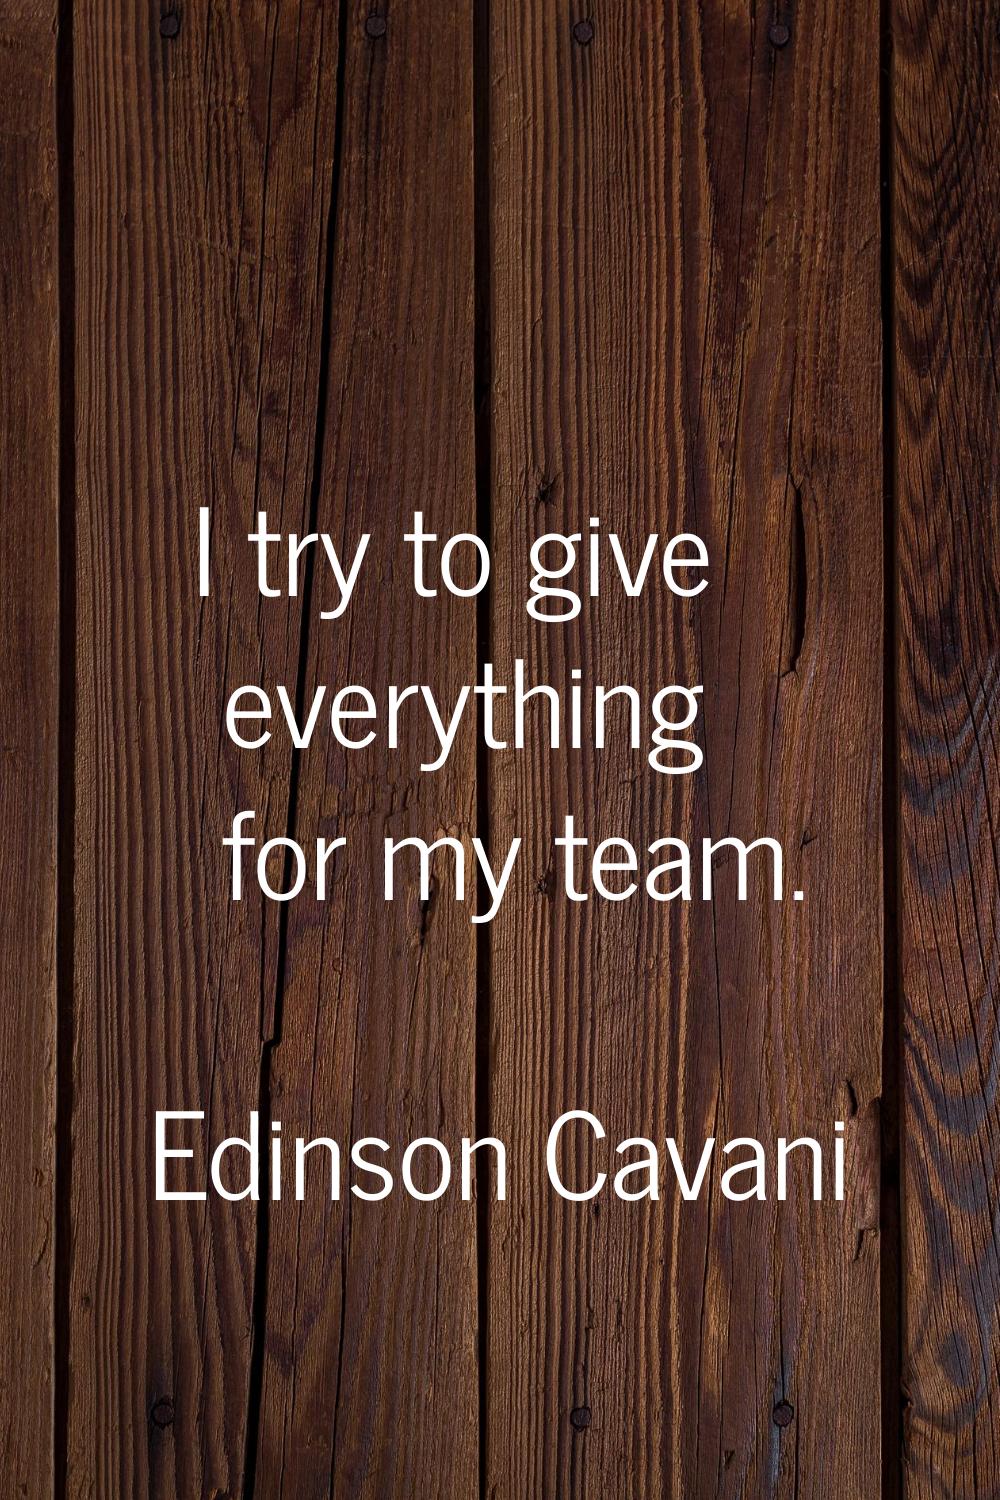 I try to give everything for my team.